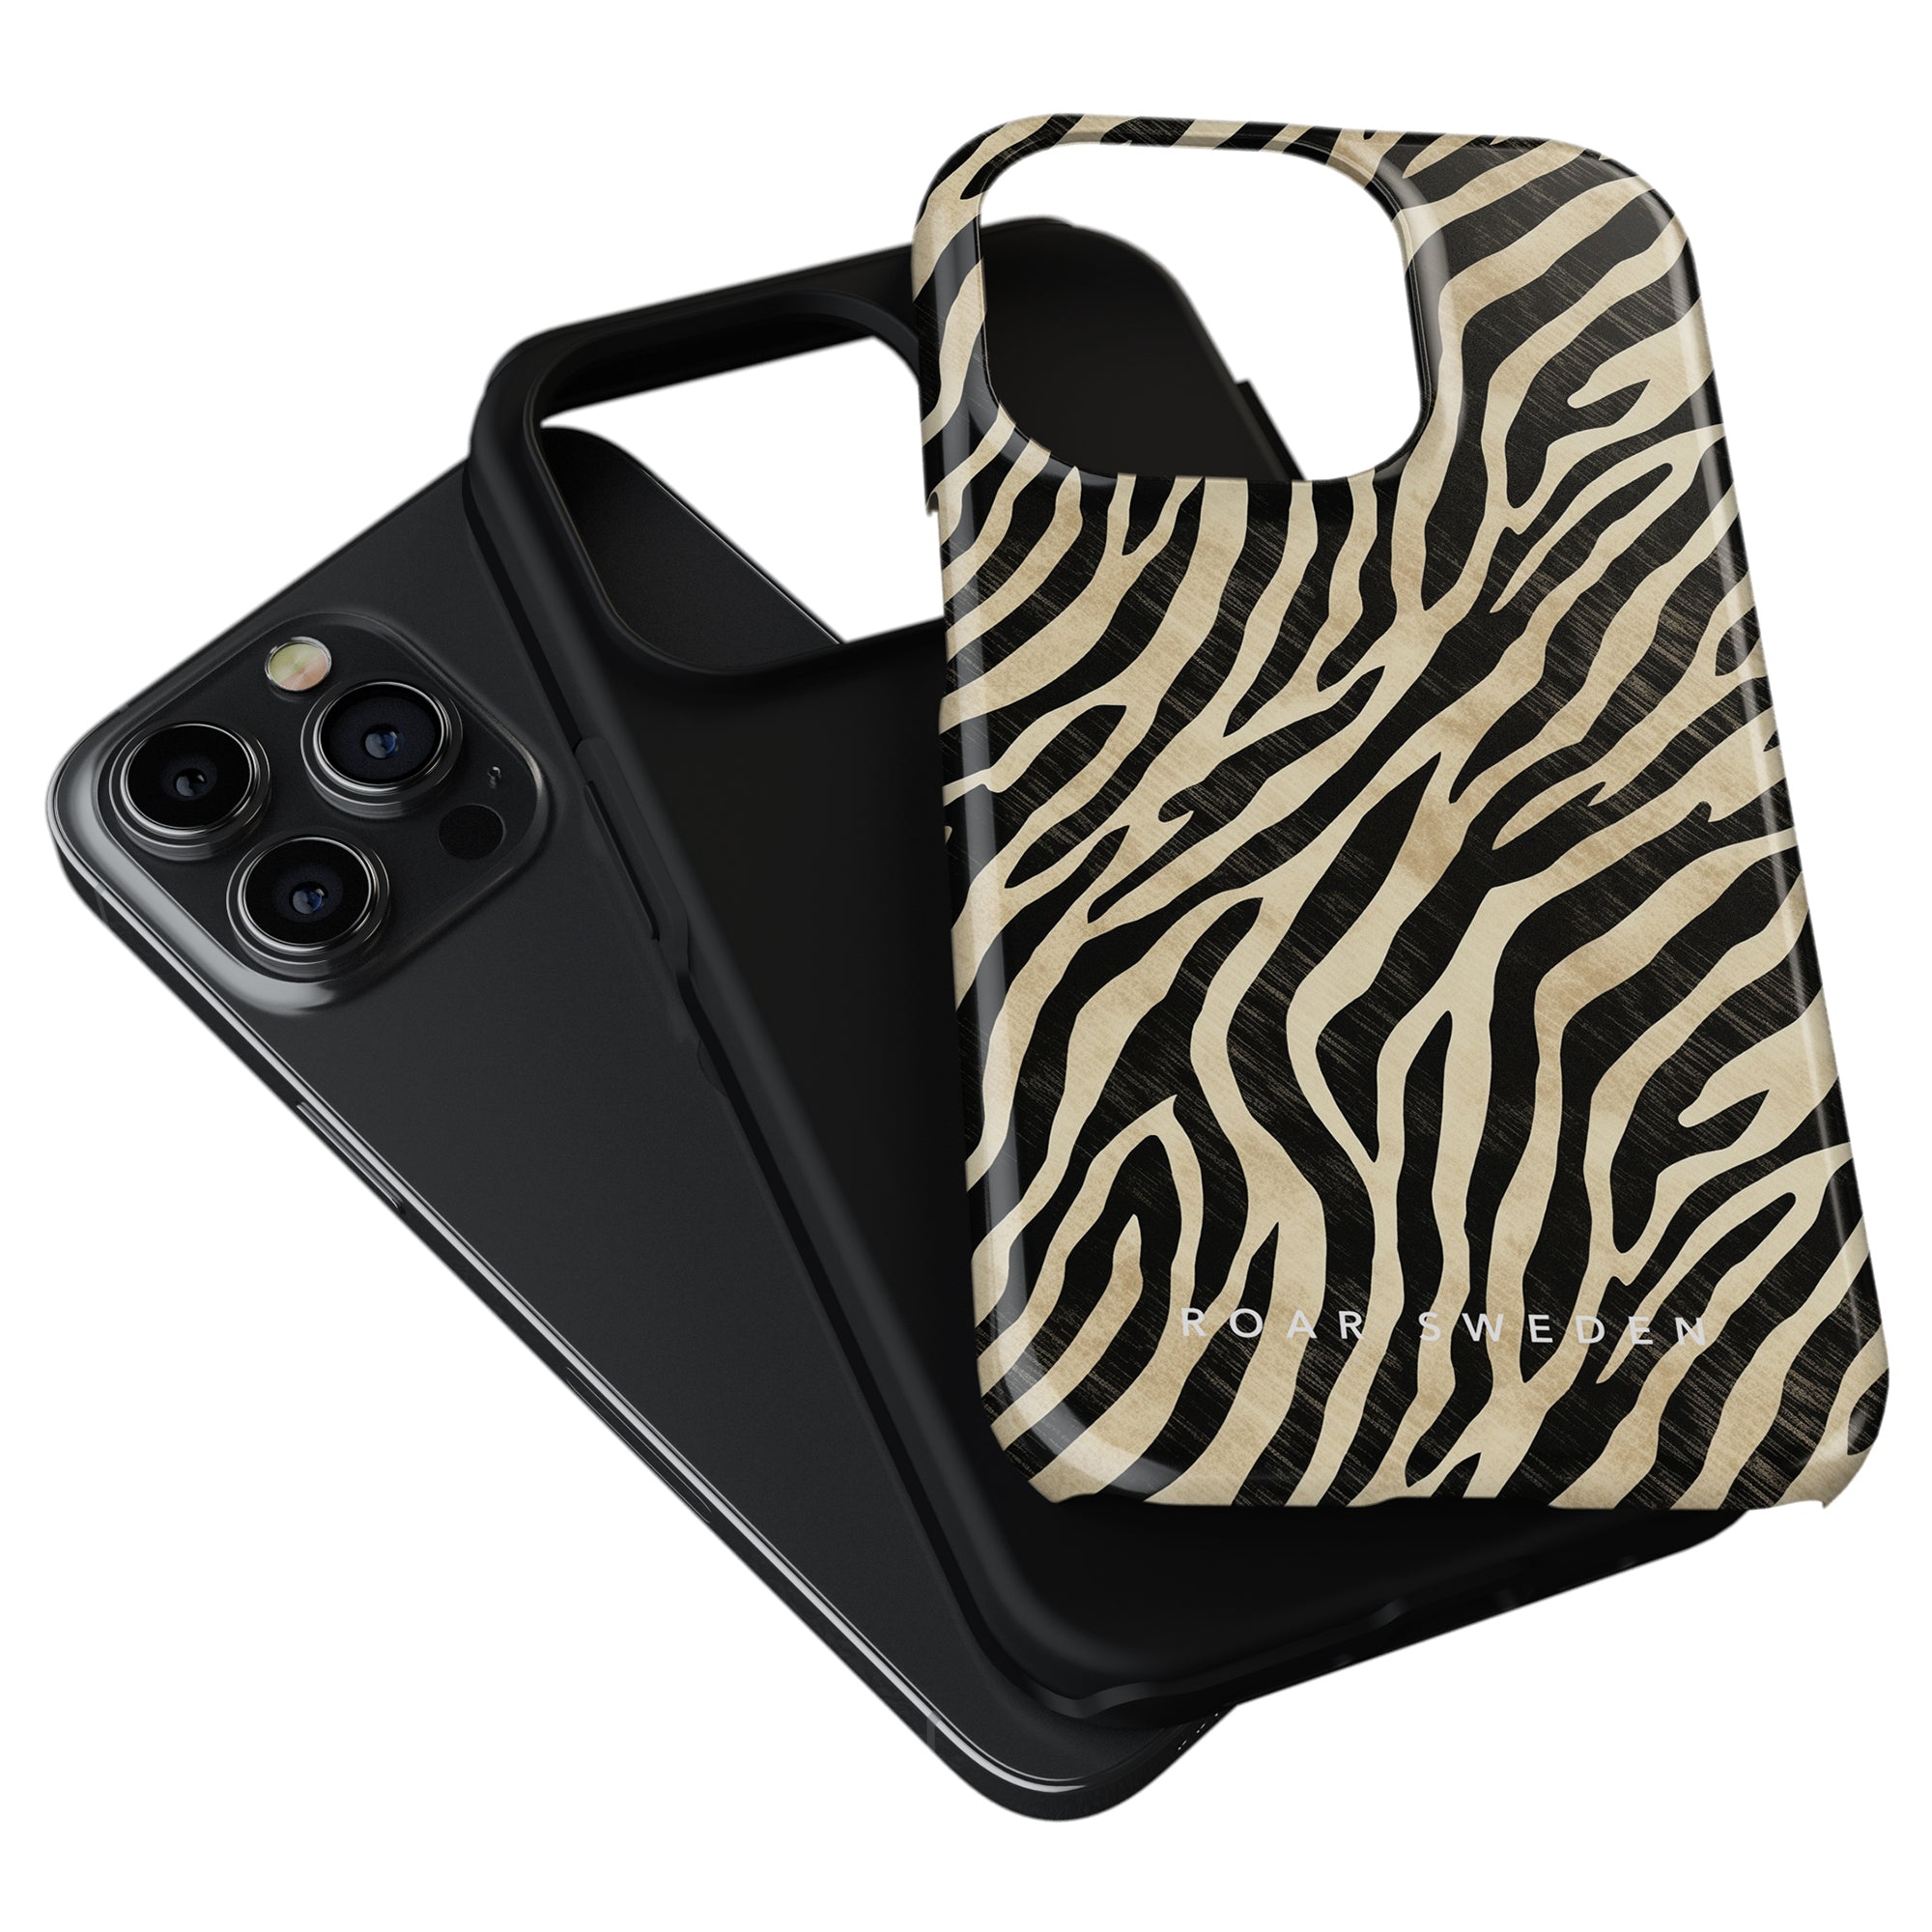 Two smartphone cases, one from the "Marty - Tough Case" line in plain black and one with a zebra print design from our Zebra Collection, positioned with a smartphone. The zebra print case is slightly raised above the black one, offering stylish yet robust skydd.